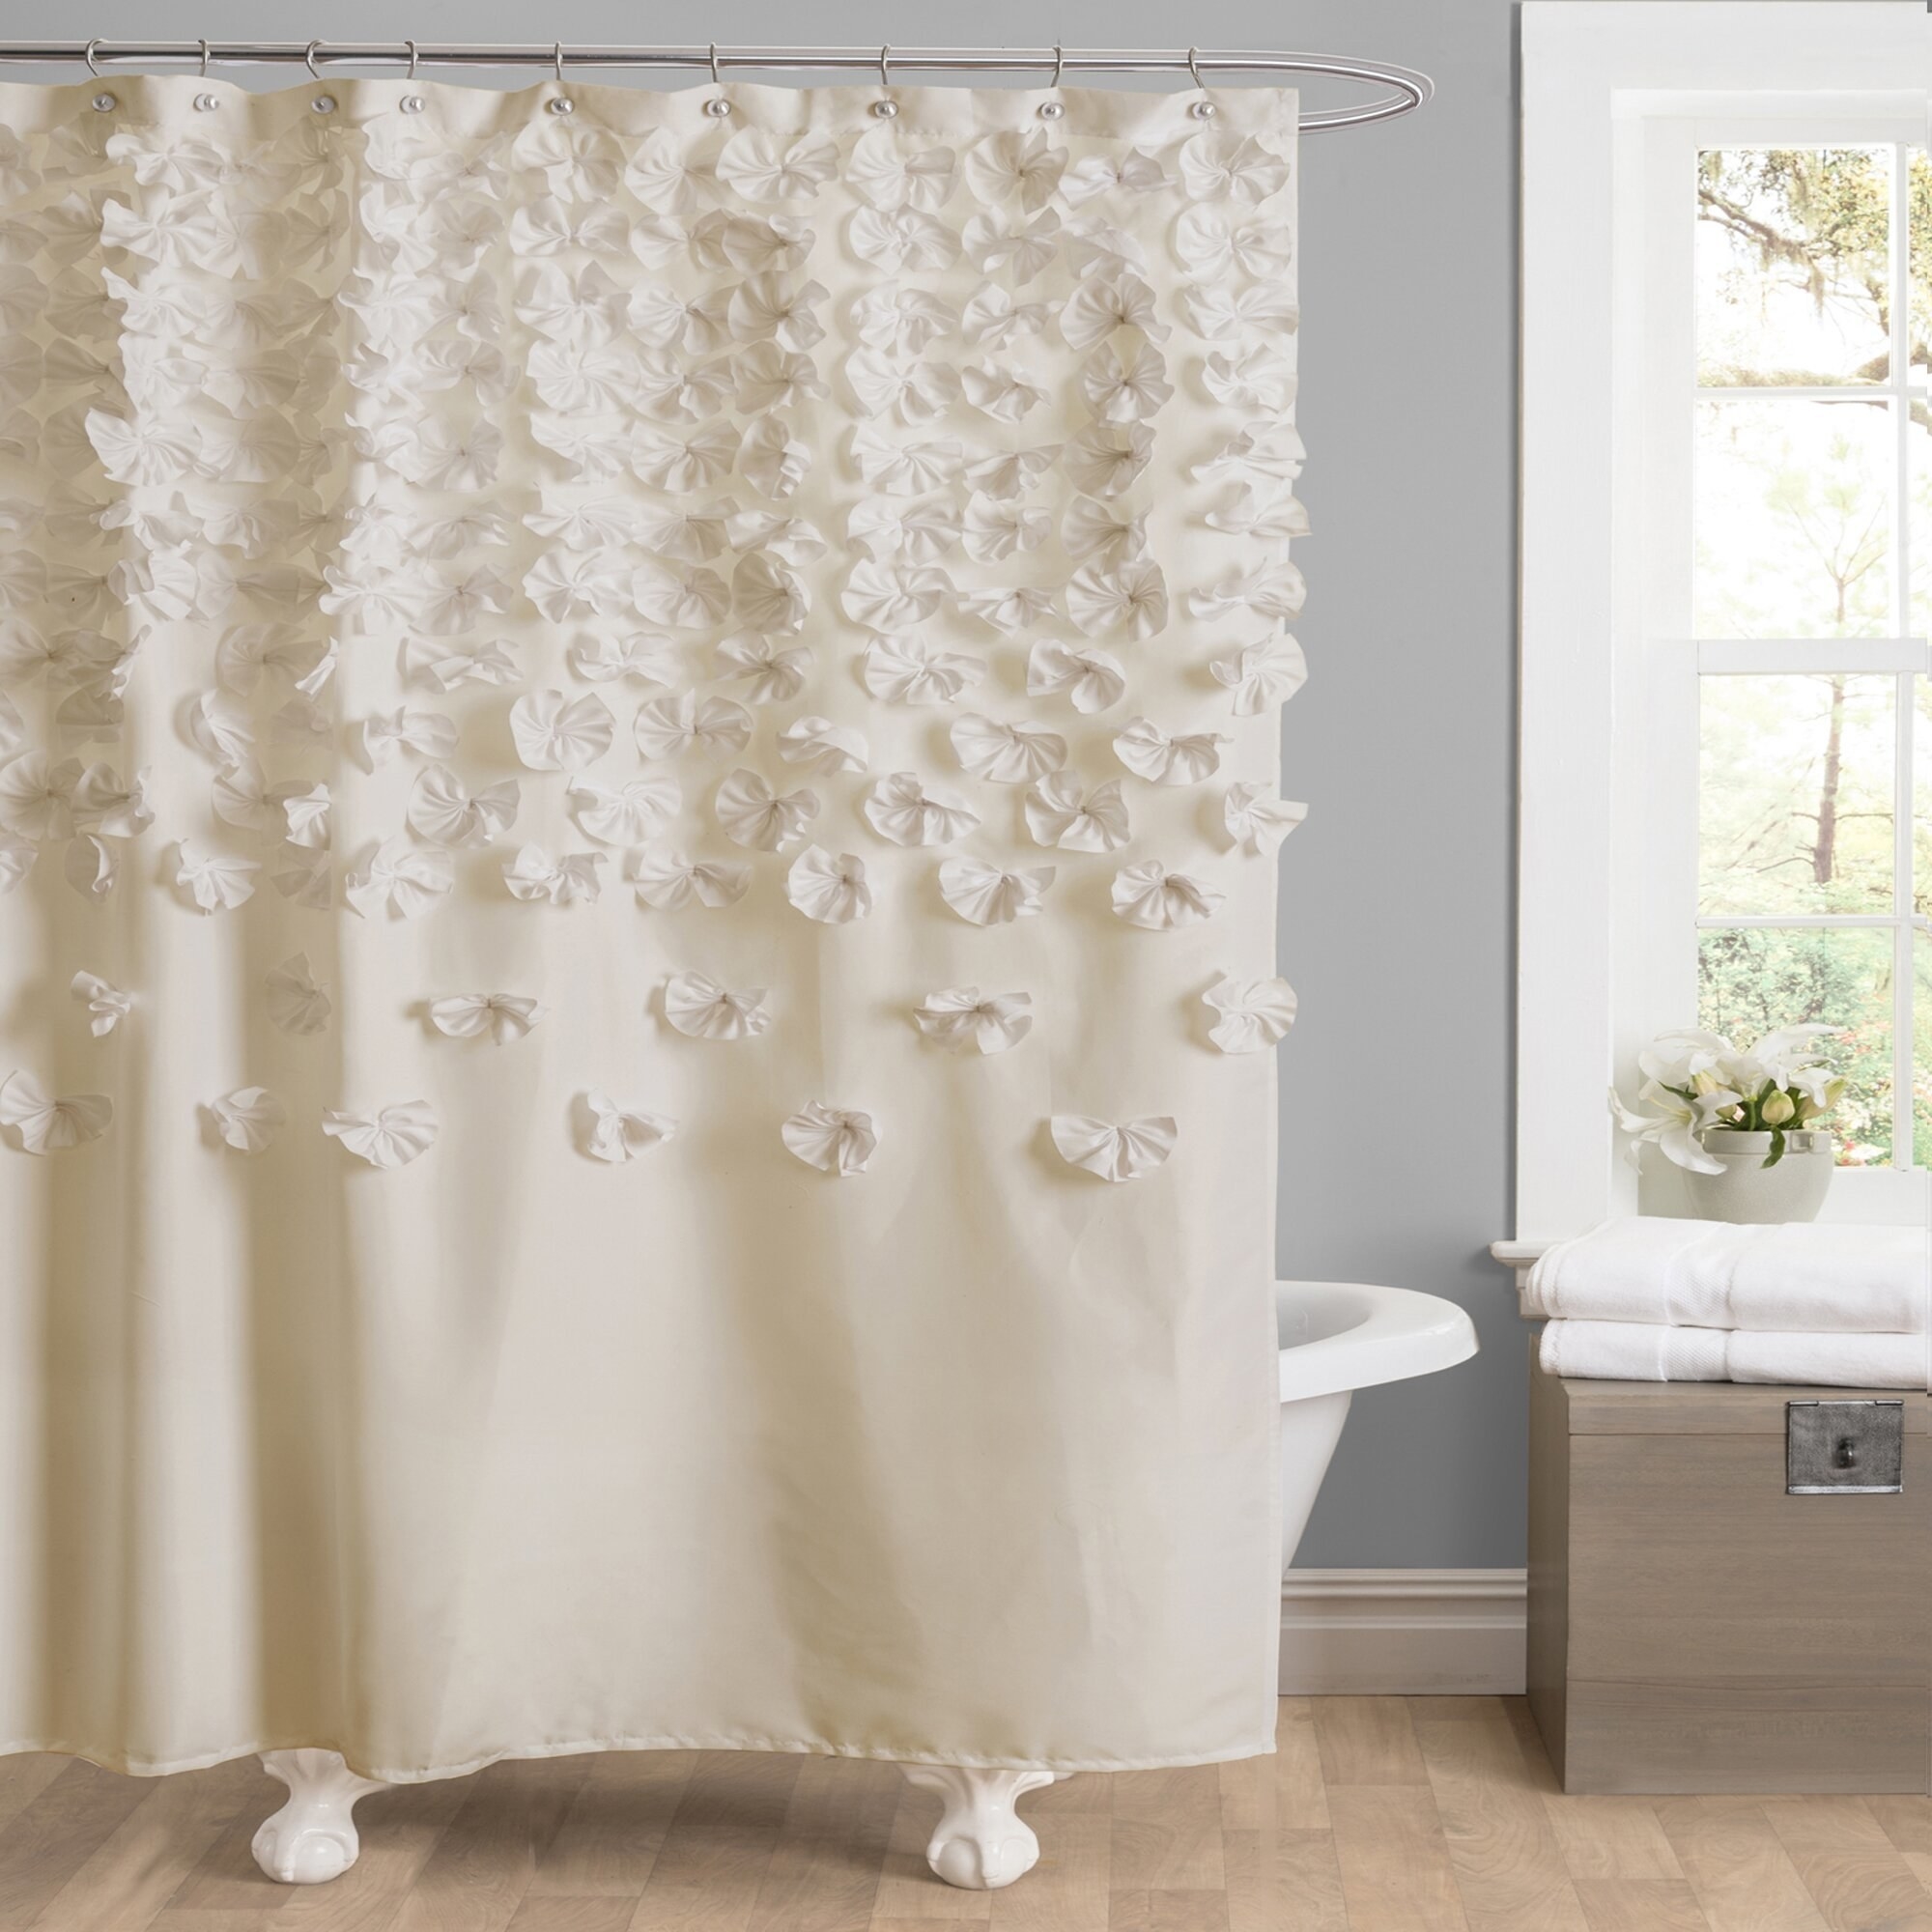 A white curtain with flower ruffles sprinkling down it